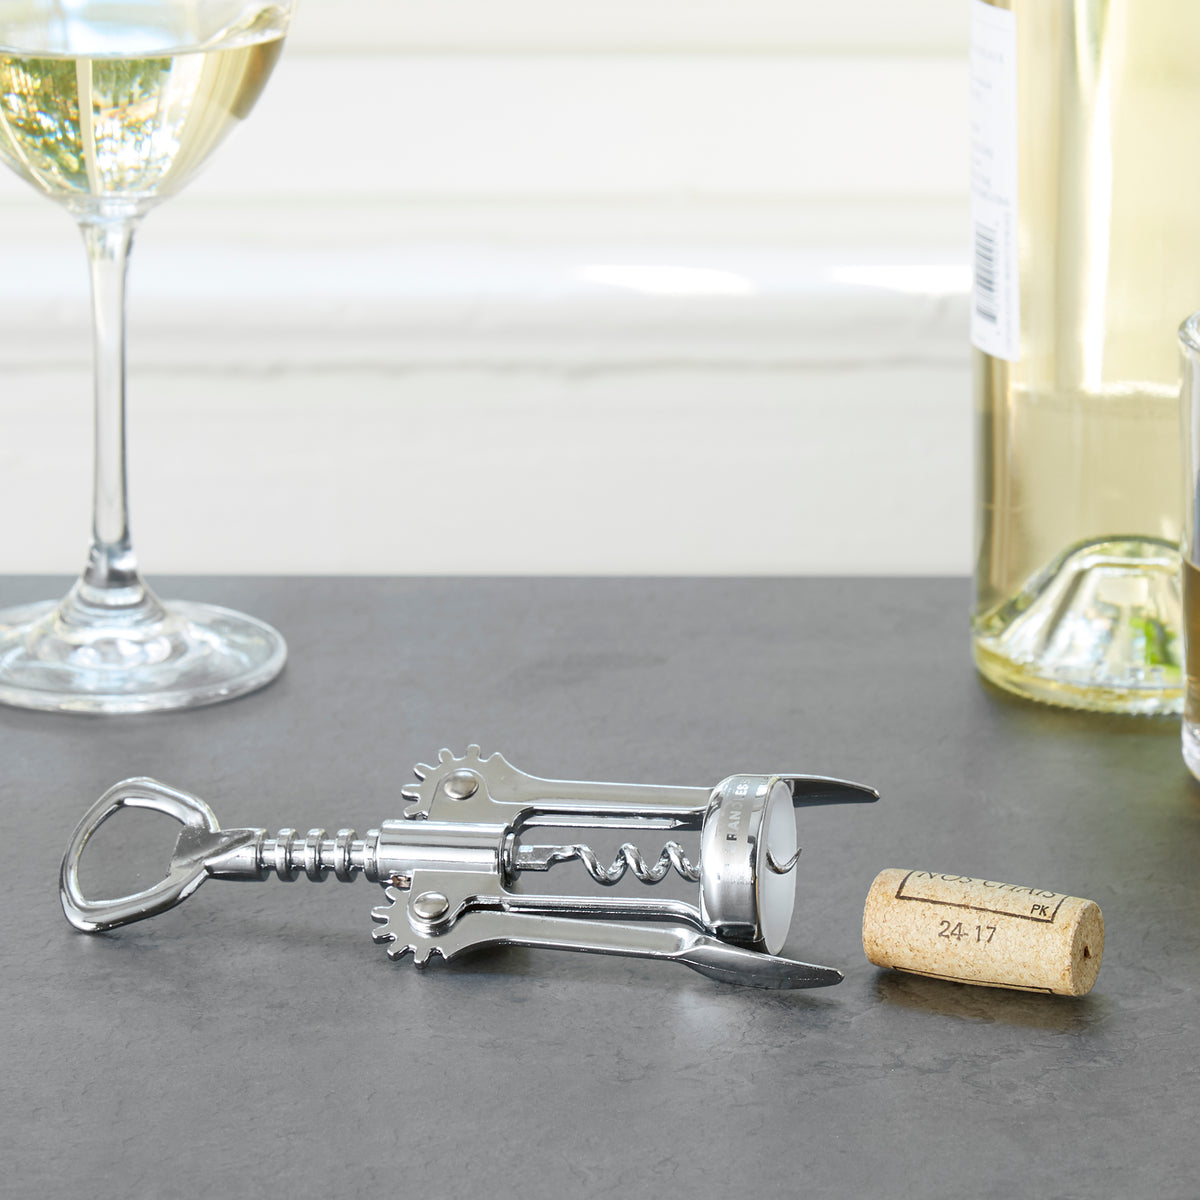 Lifestyle photo, corkscrew on a counter next to a cork, having just been removed from a bottle of white wine.